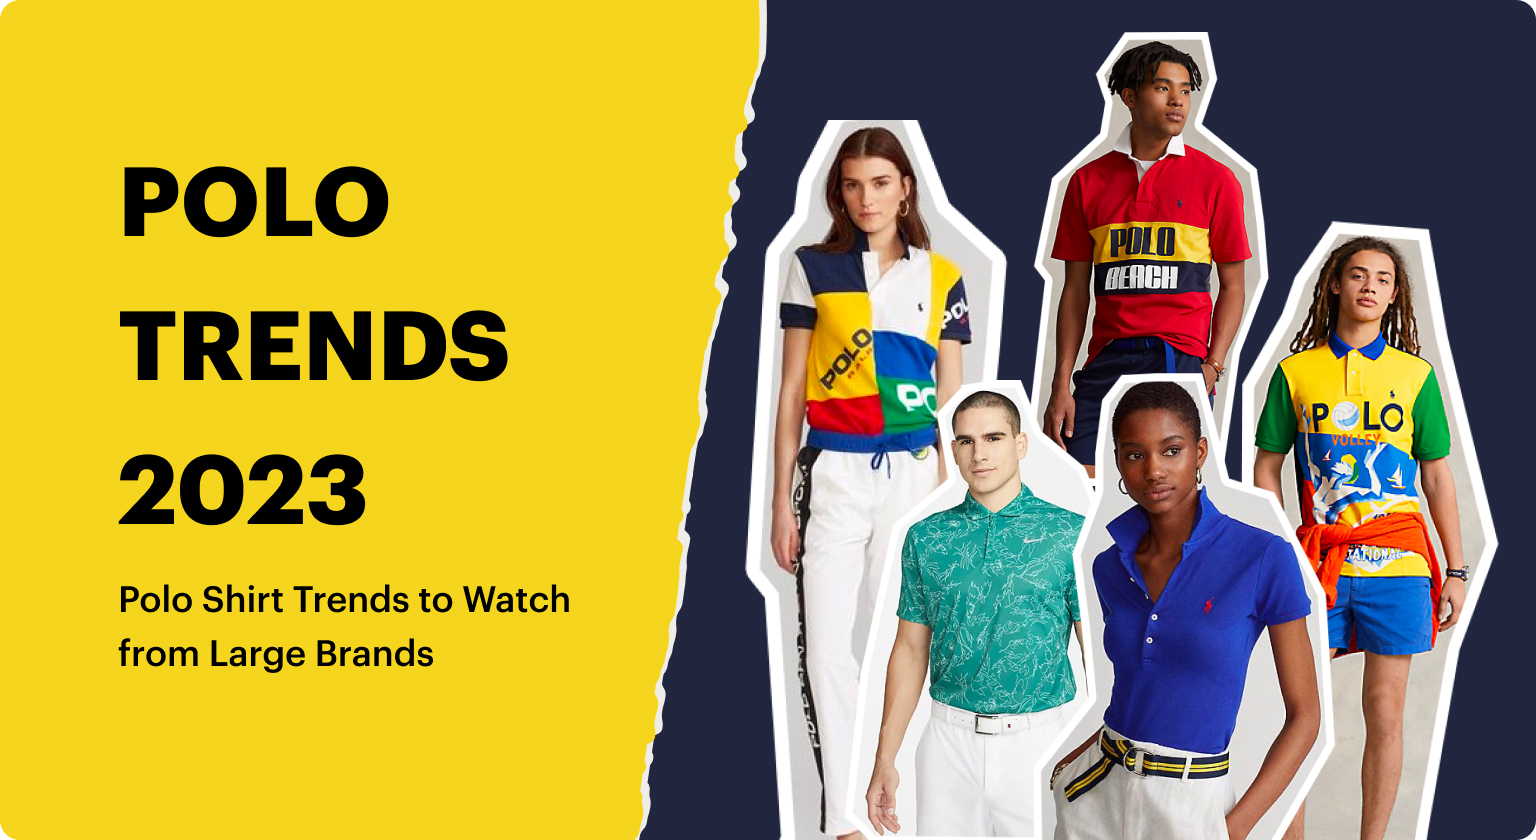 Polo Trends 2023: Trends to Watch from Large Brands